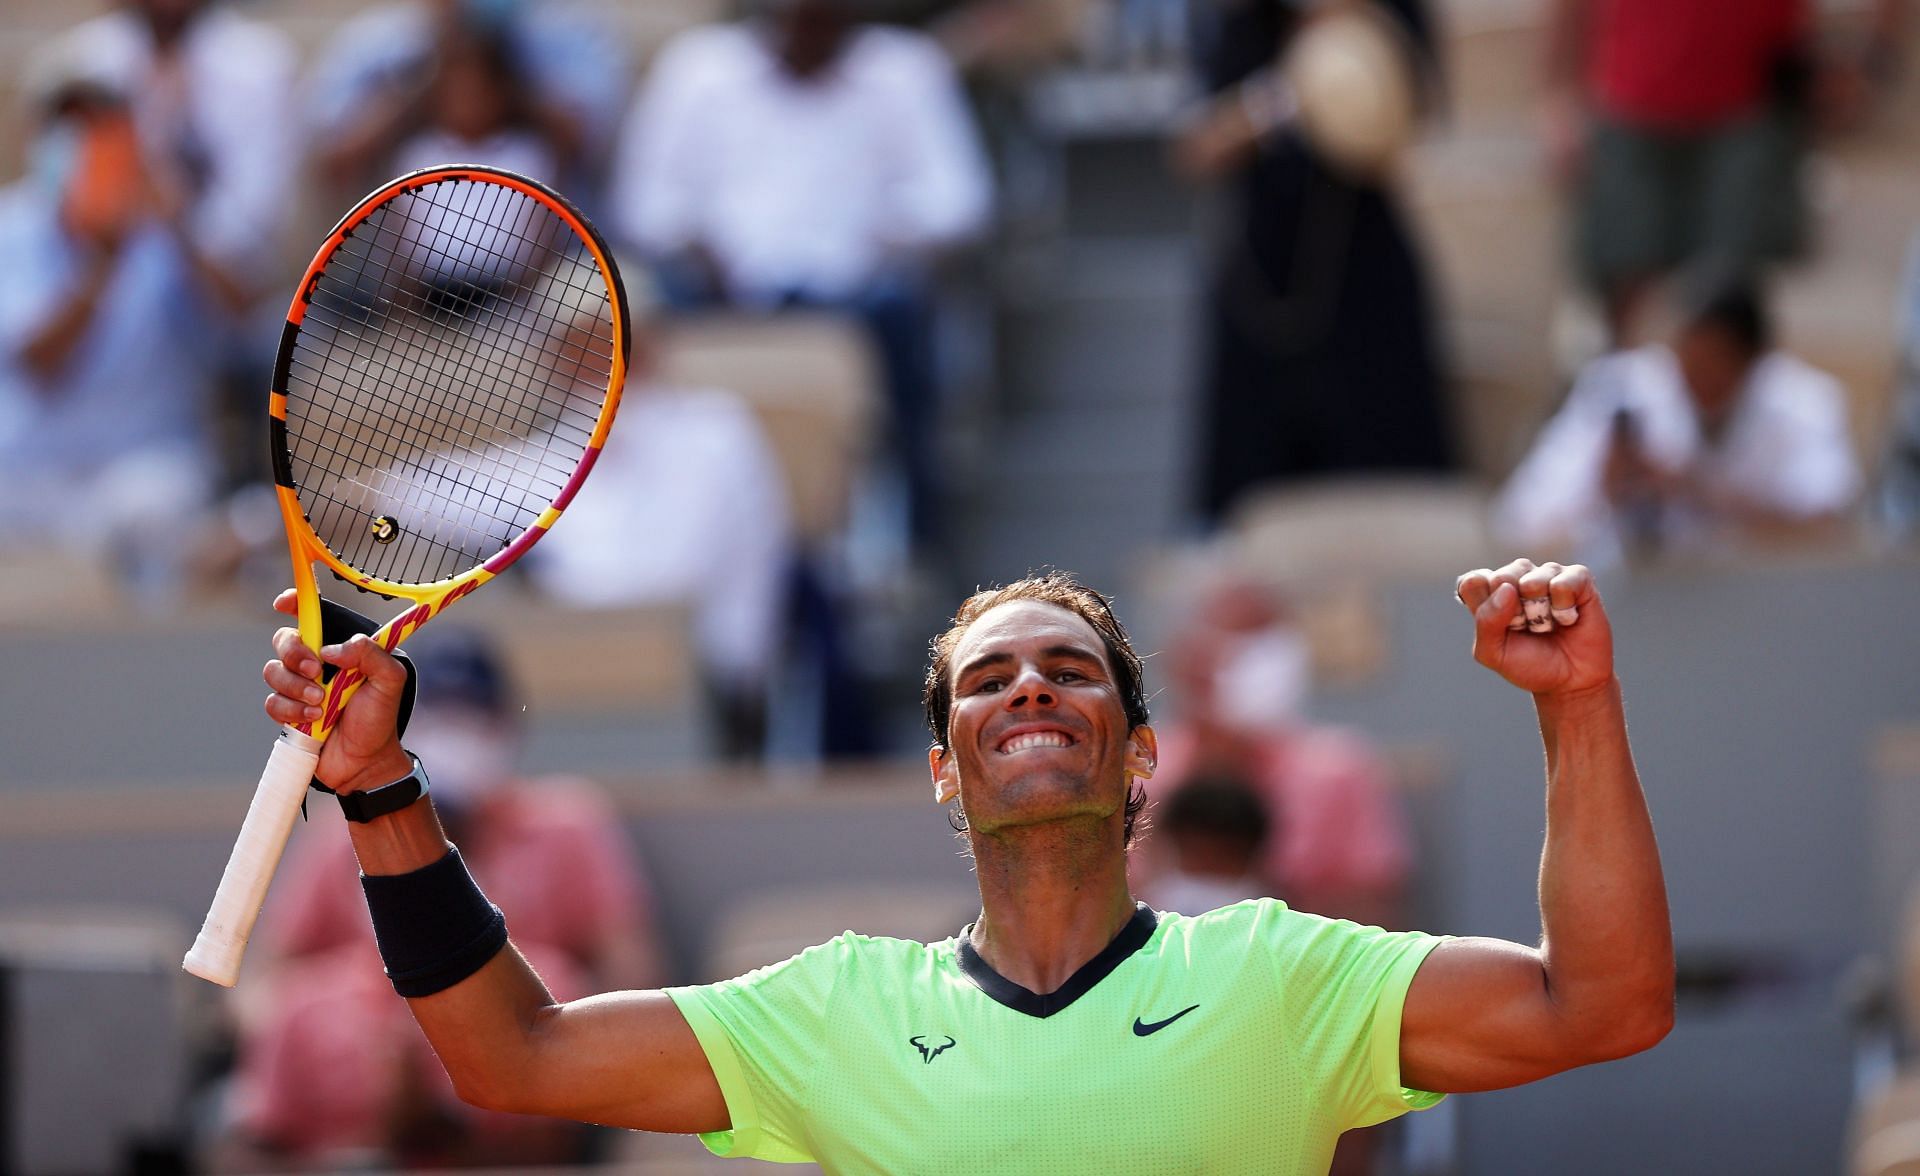 Rafael Nadal celebrates beating Diego Schwartzman in the quarterfinals of the 2021 French Open